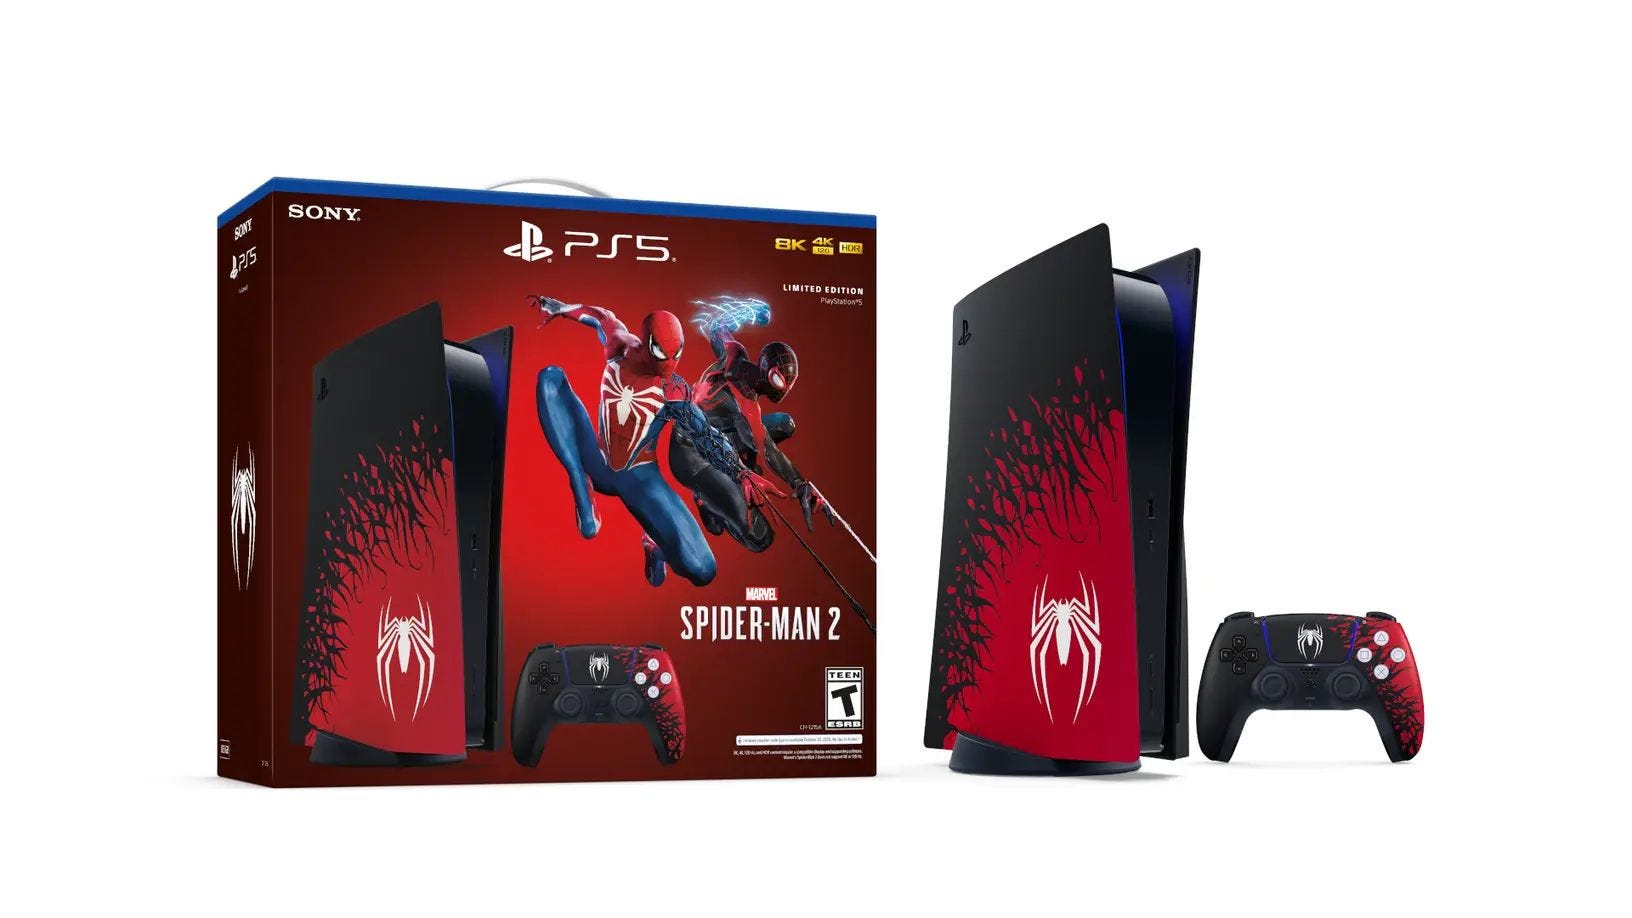 SpiderMan 2 PS5 bundle price, release date, restock alerts and where to preorder